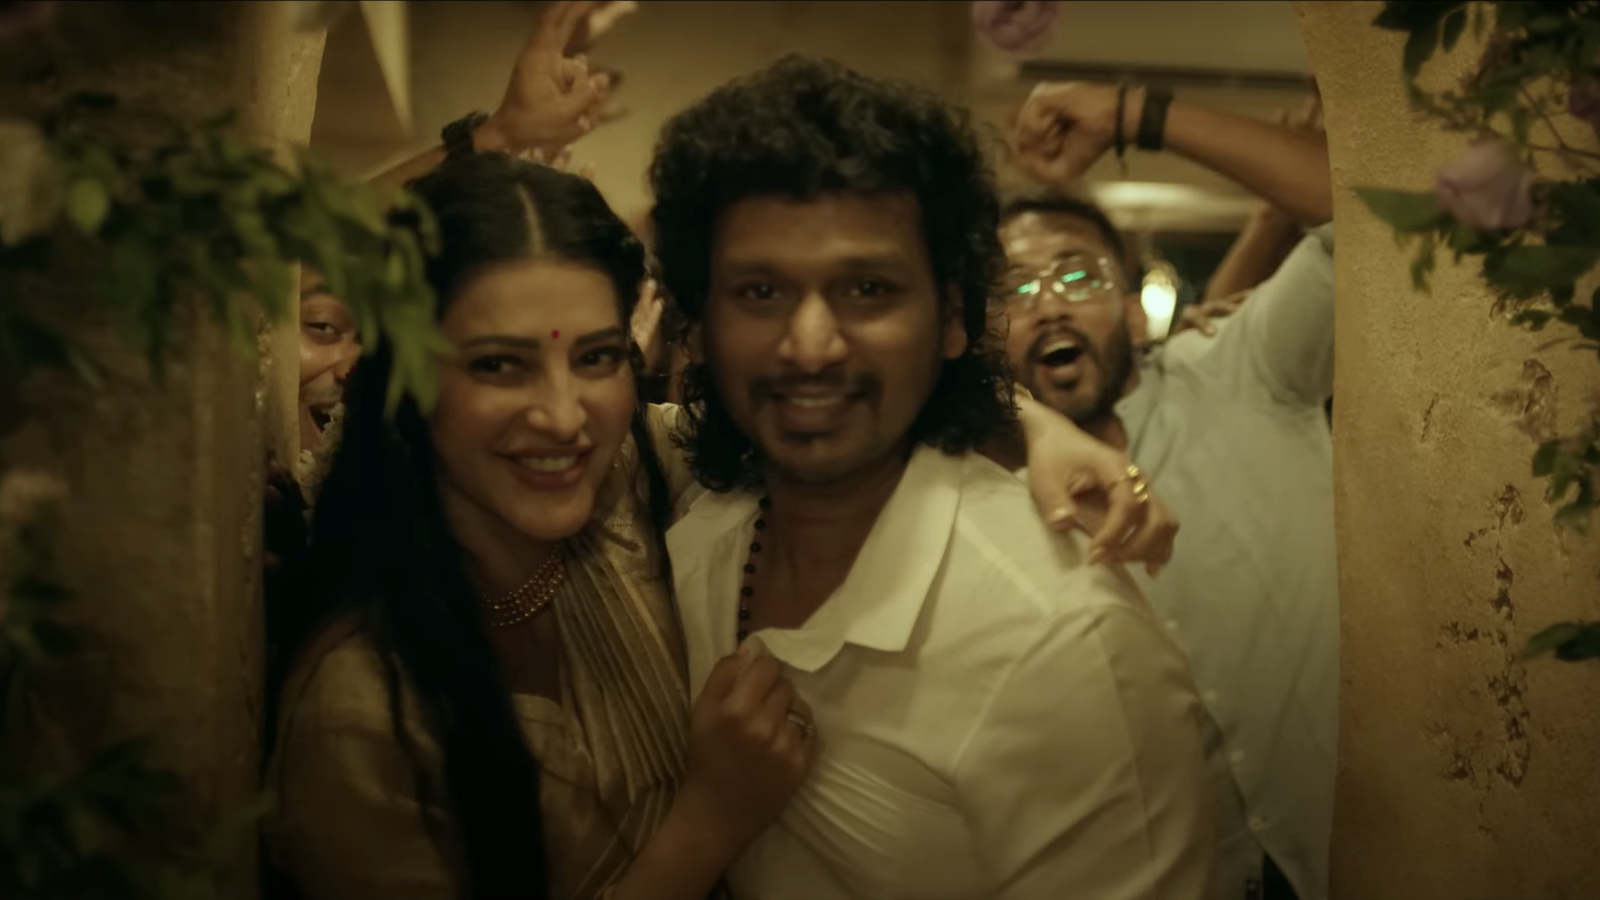 Inimel song: Lokesh Kanagaraj and Shruti Haasan's music video explores the  depths of a young couple's romance | Tamil News - The Indian Express